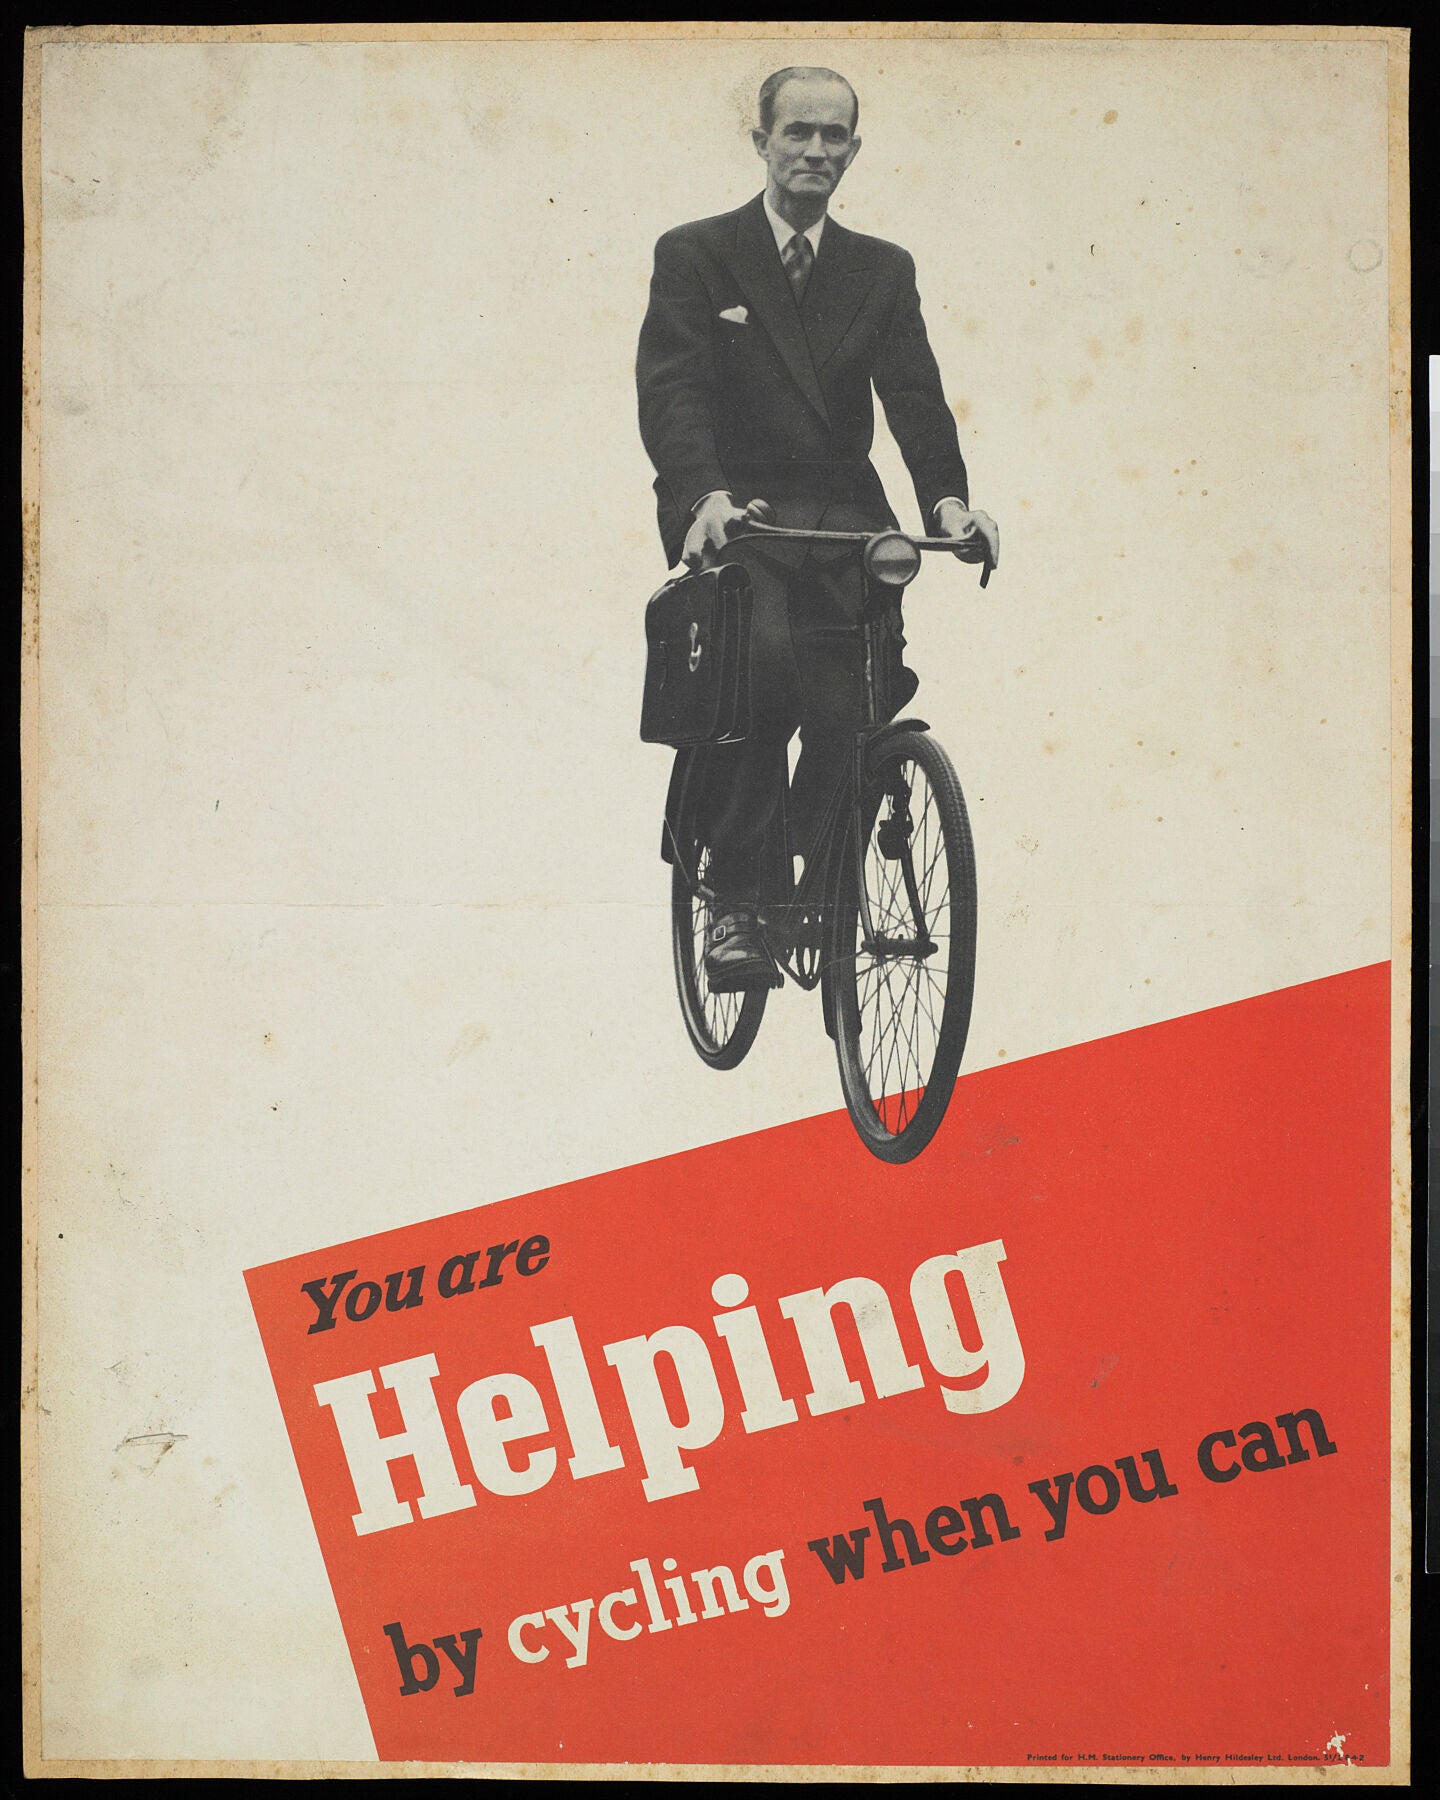 You are helping by cycling when you can' by Henry Hildesley Ltd - 1940s